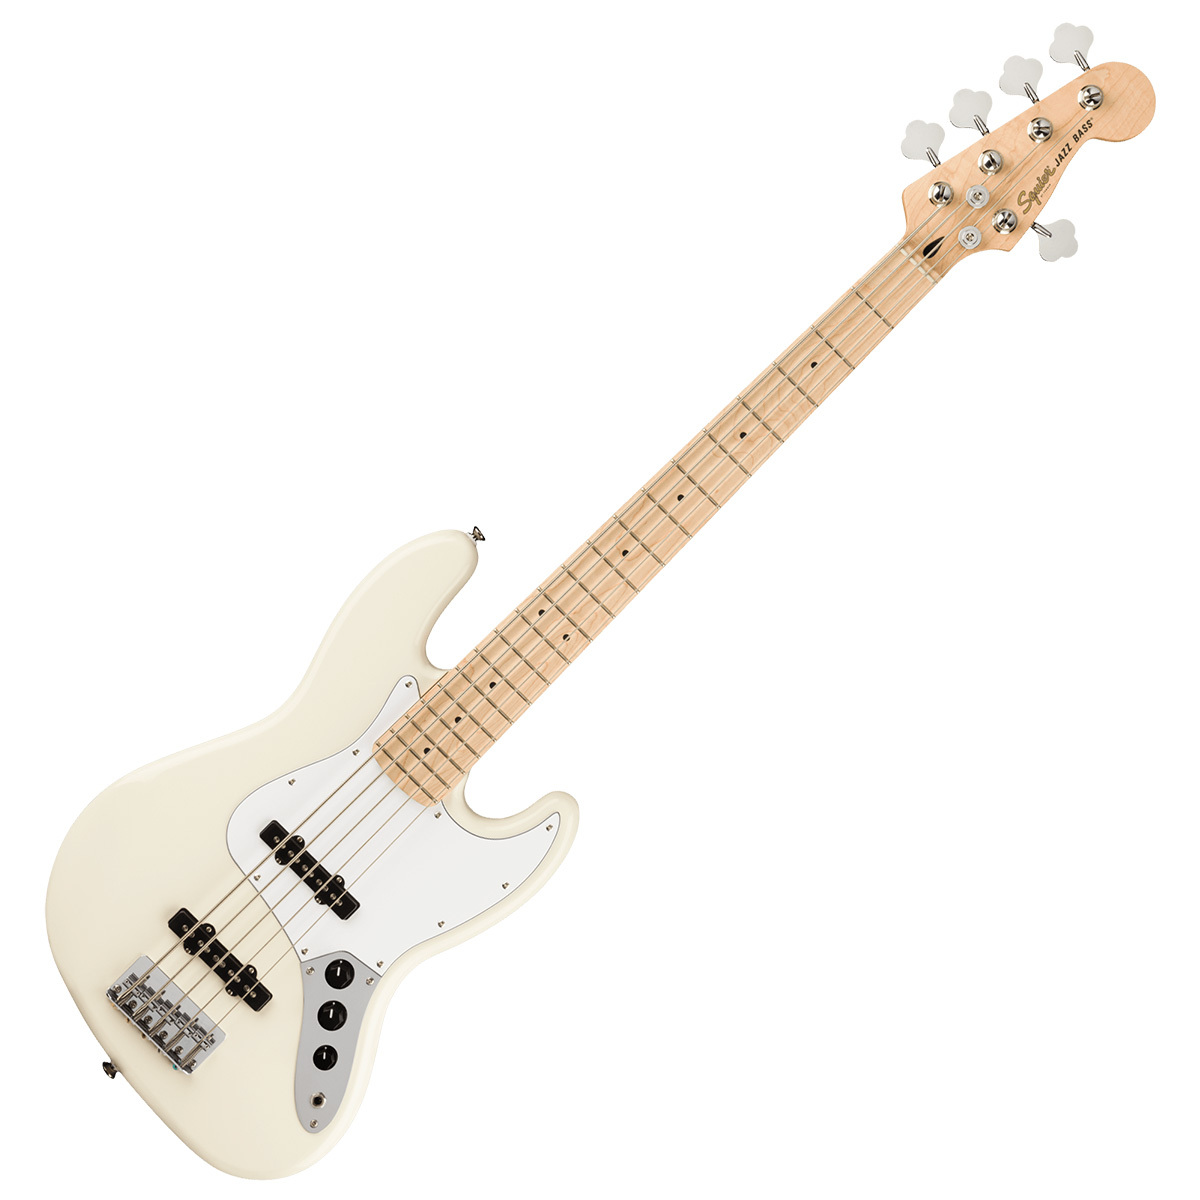 Squier by Fender Affinity Series J BASS V MN WPG OLW エレキベース